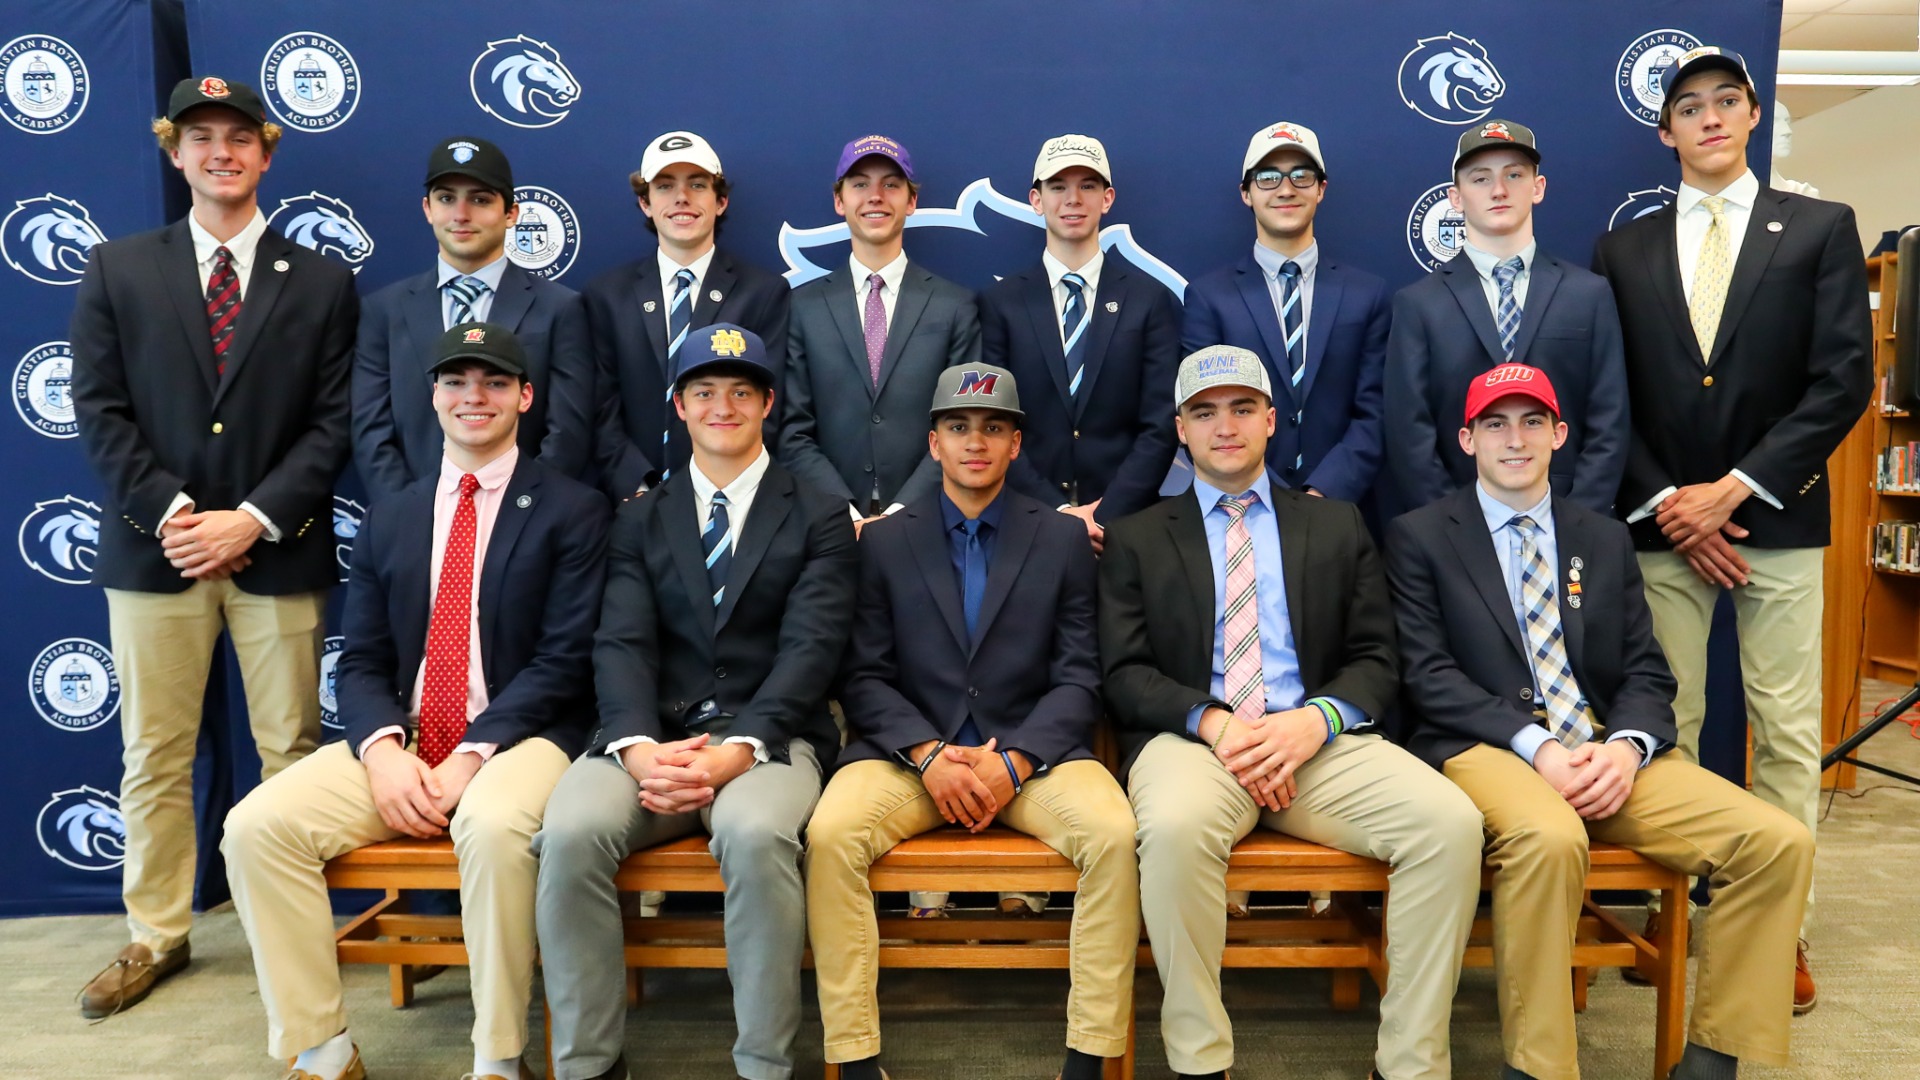 CBASlide 0 - THIRTEEN STUDENT-ATHLETES COMMIT TO PLAY COLLEGE ATHLETICS